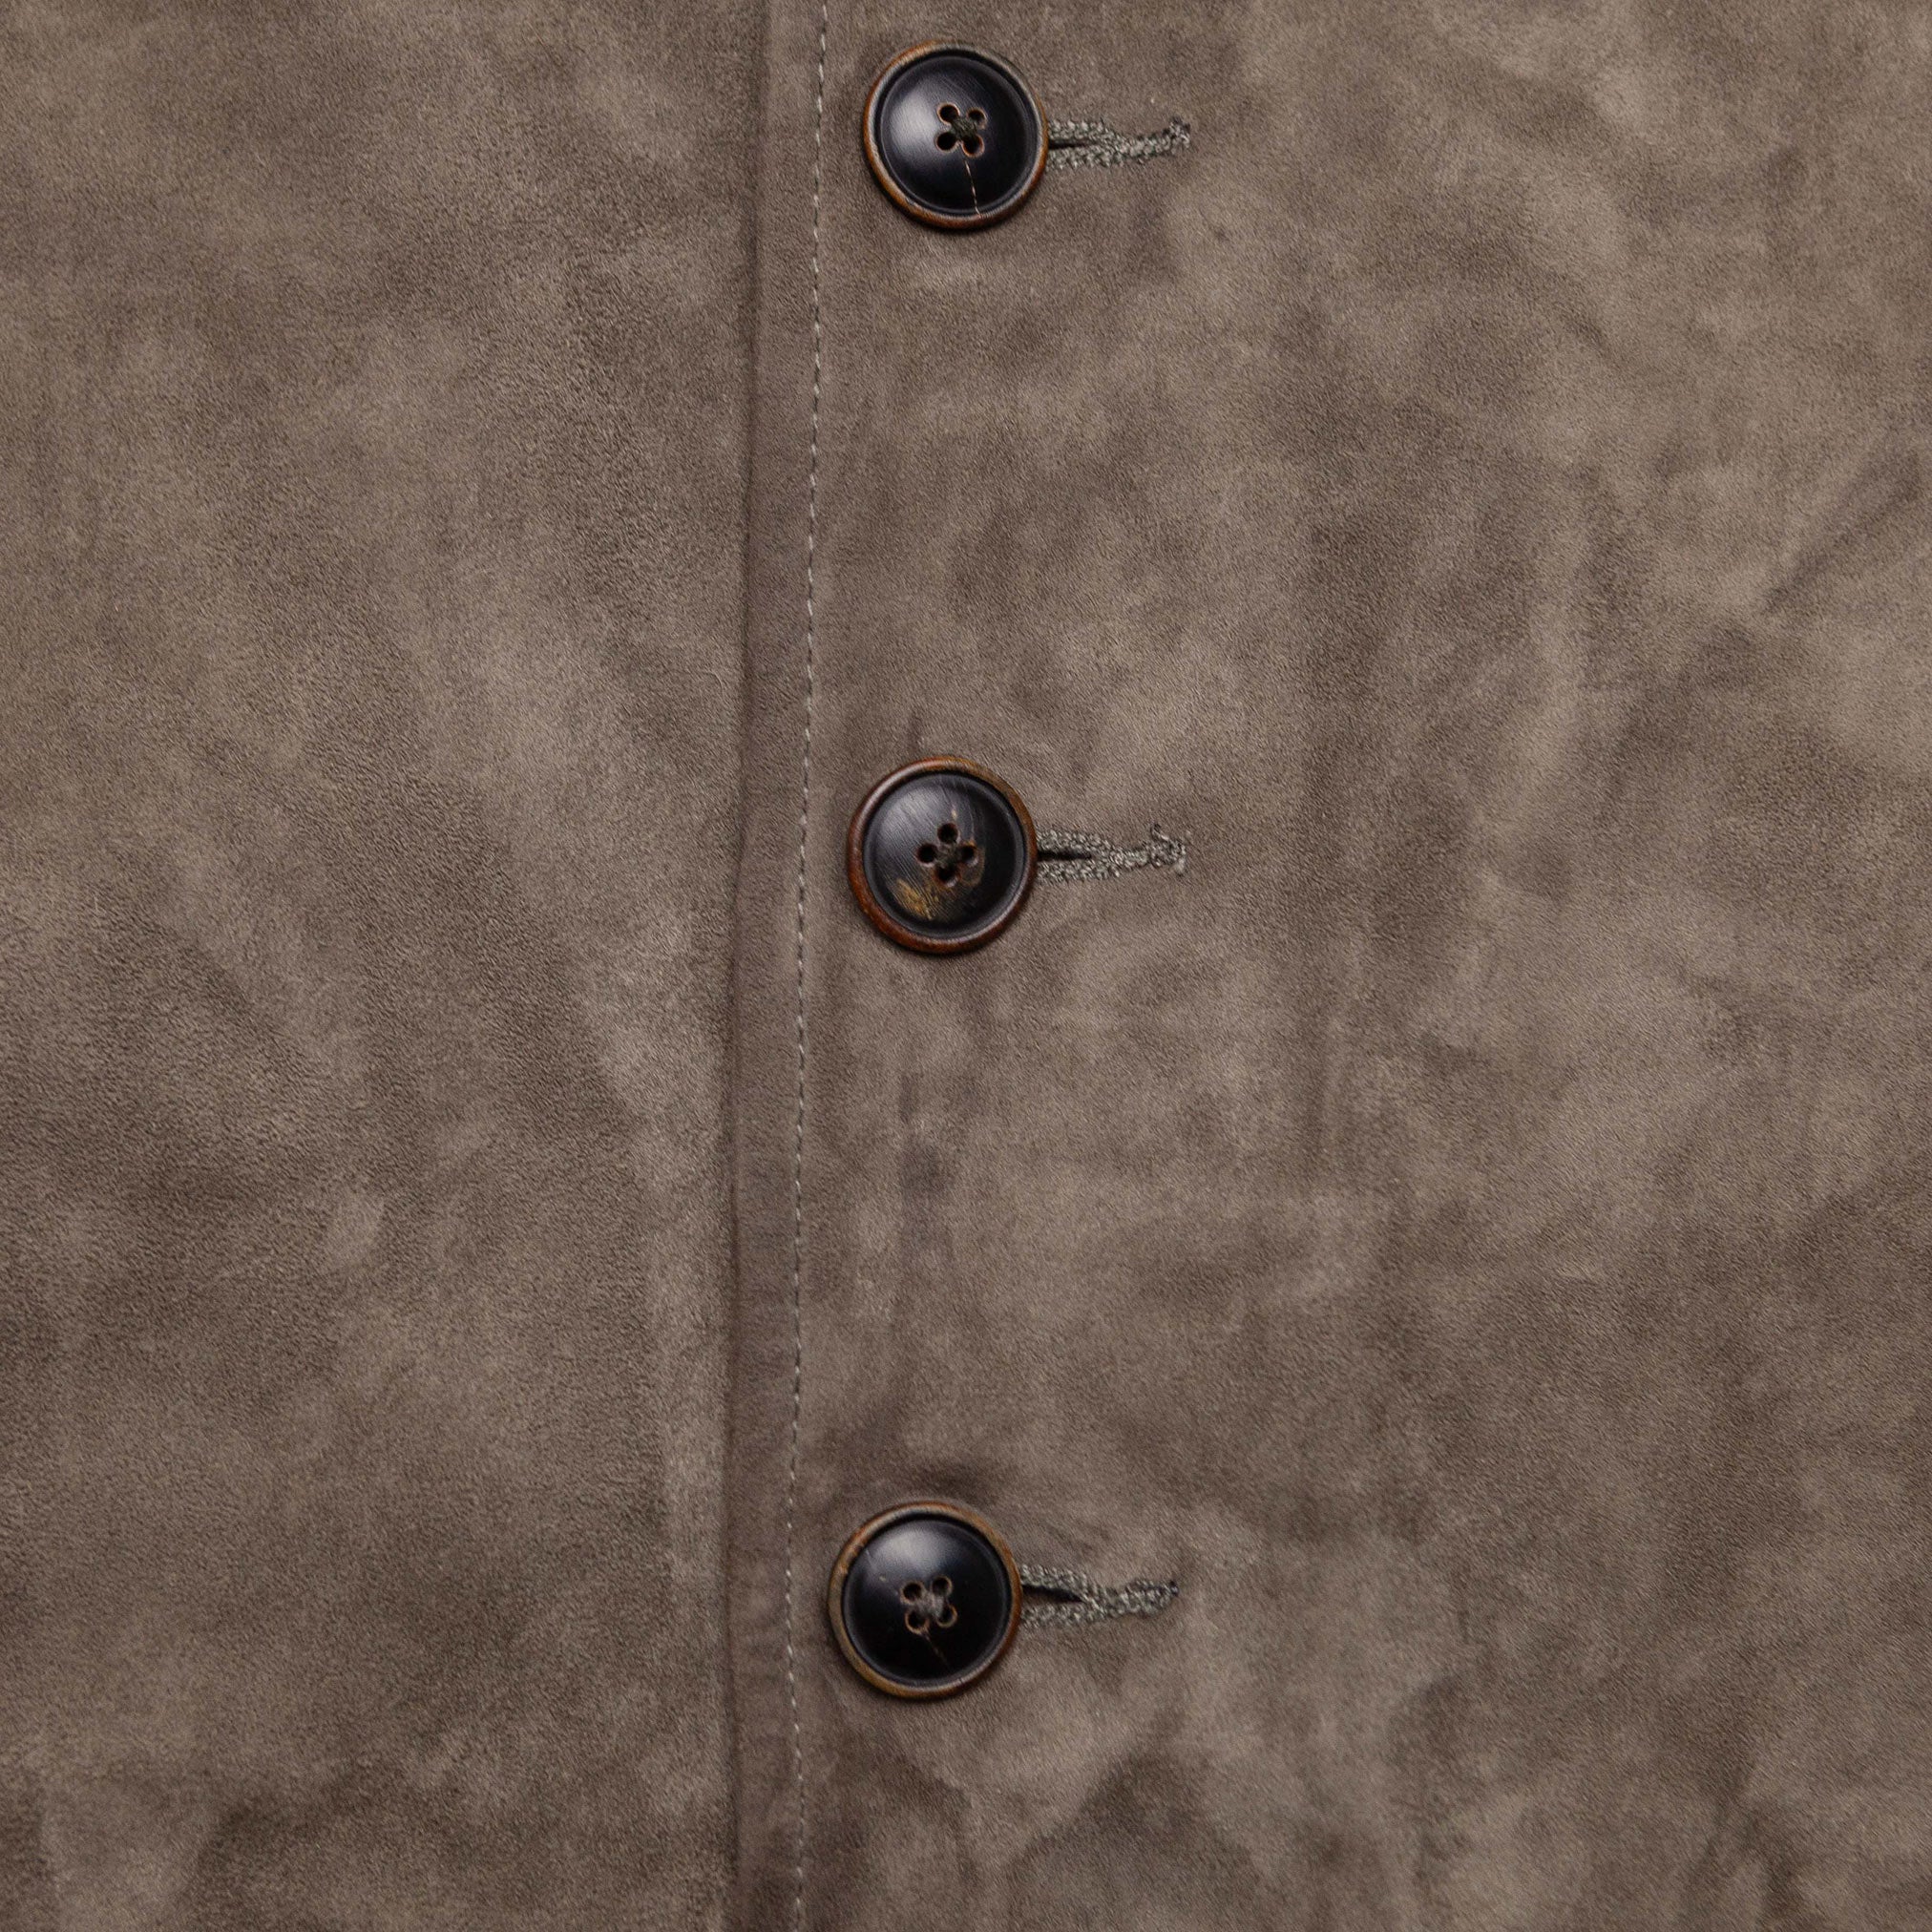 Suede Jacket in Taupe - S